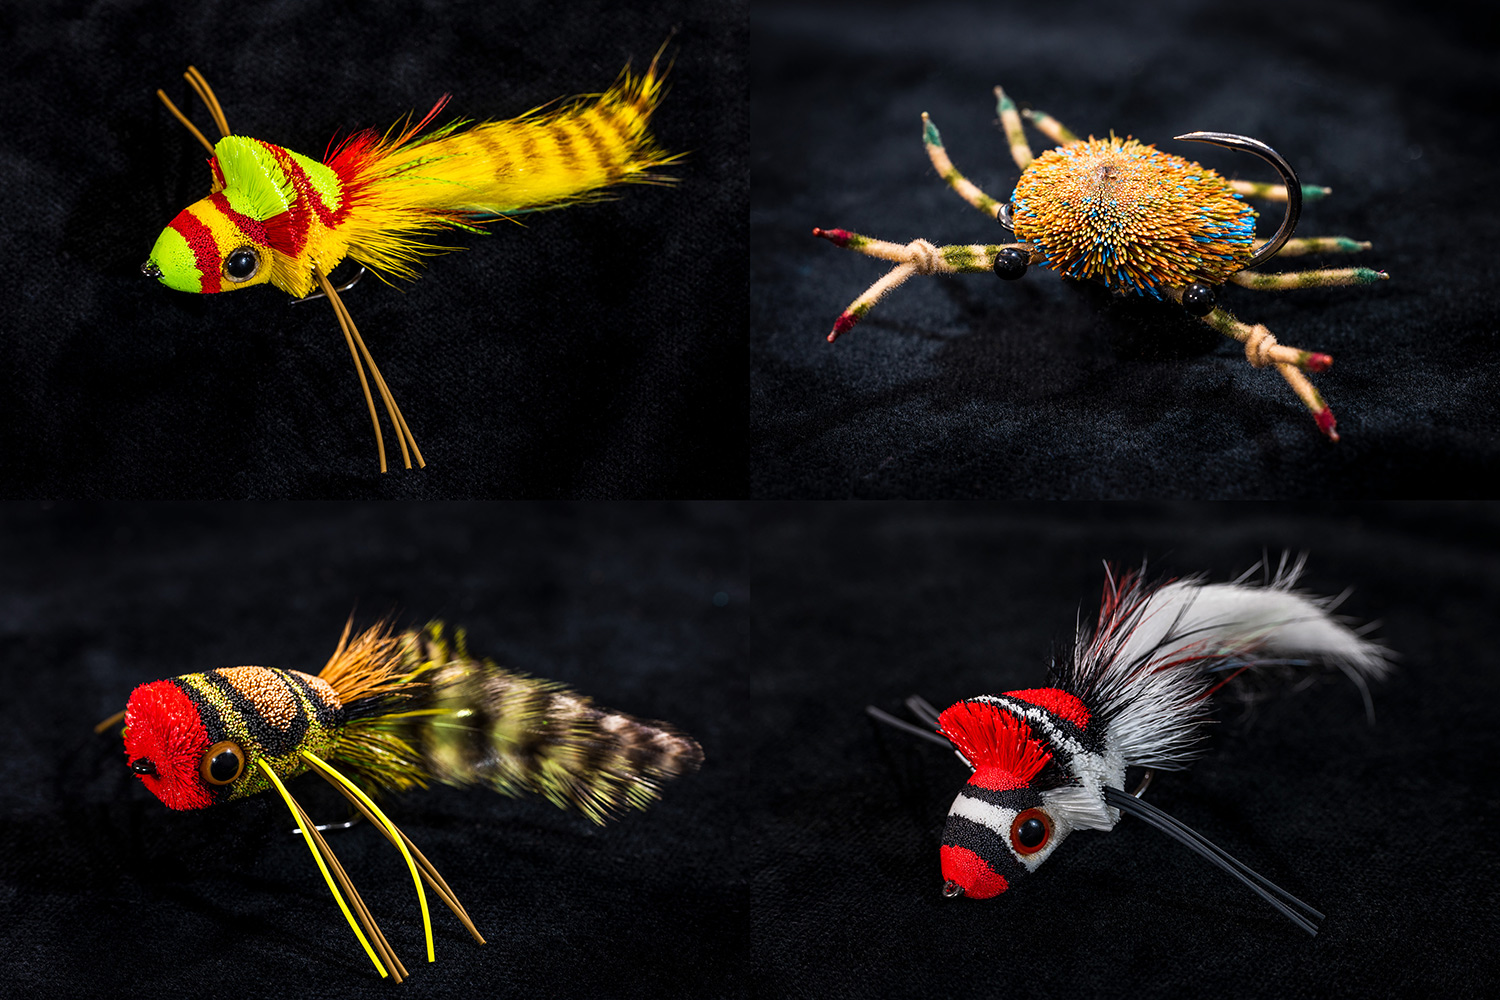 four fishing flies tied by Brandon Bailes, one shaped like a crab